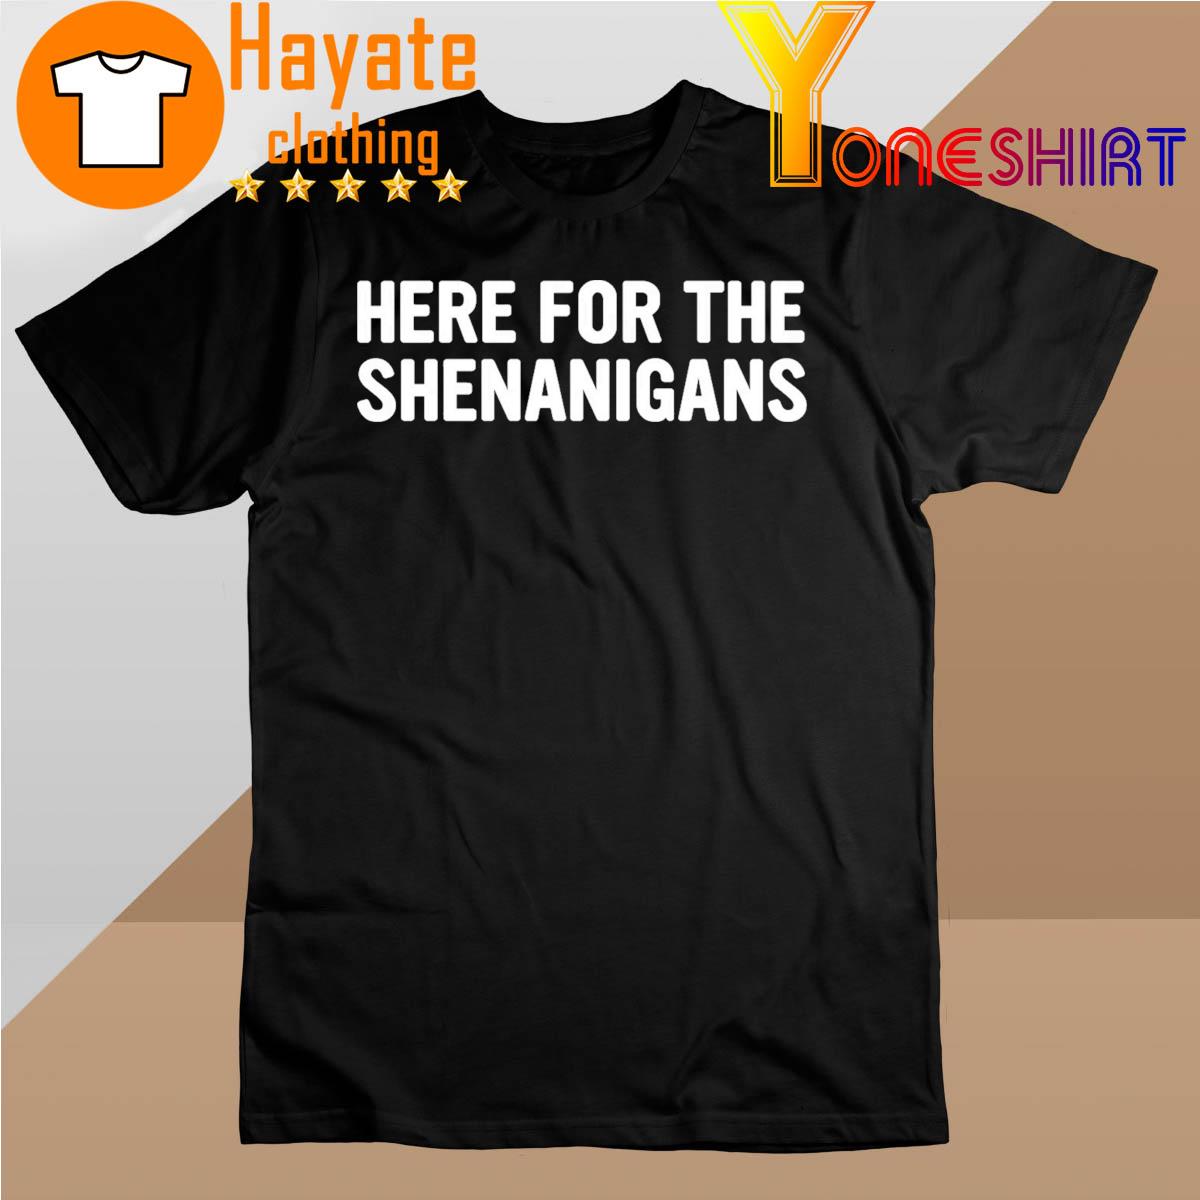 Here for the Shenanigans shirt